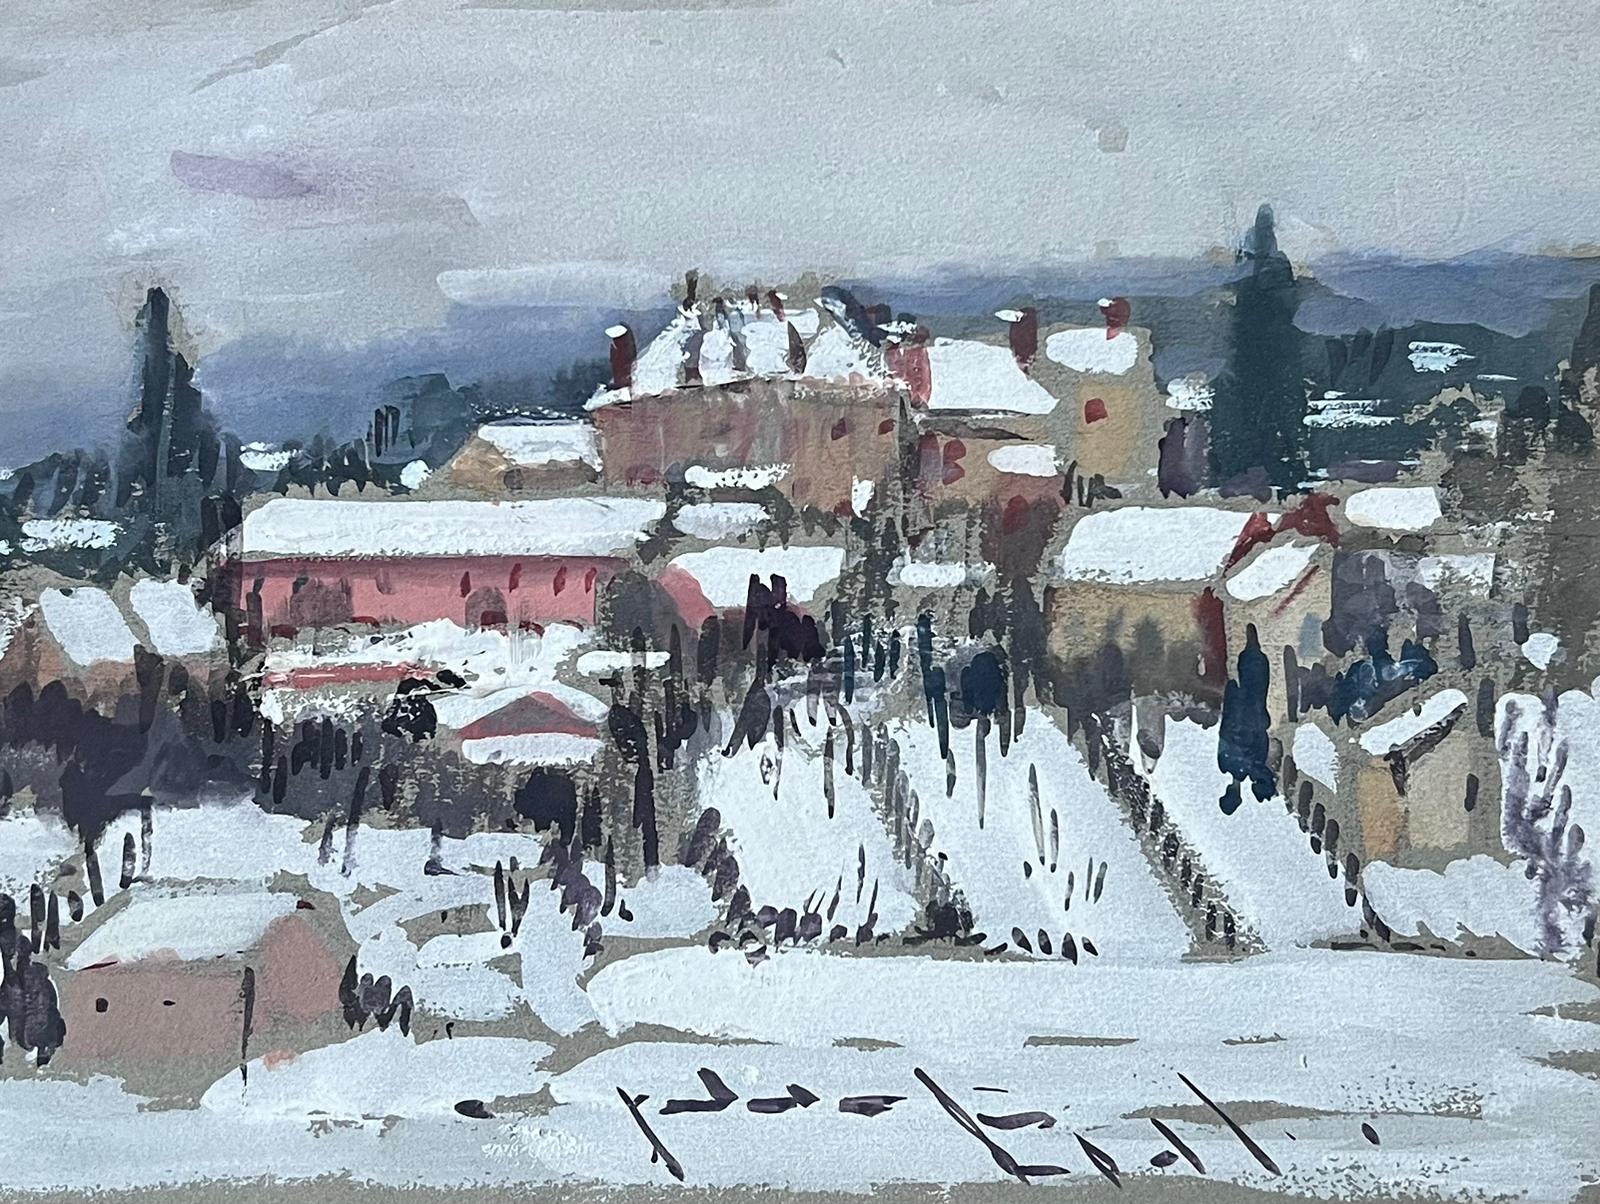 Vintage French Gouache  Painting
by Louise Alix (French, 1888-1980) *see notes below
provenance stamp to the back 
gouache painting on artist paper, unframed
measures: 6.75 inches high by 9.5 inches wide
condition: overall very good and sound, a few